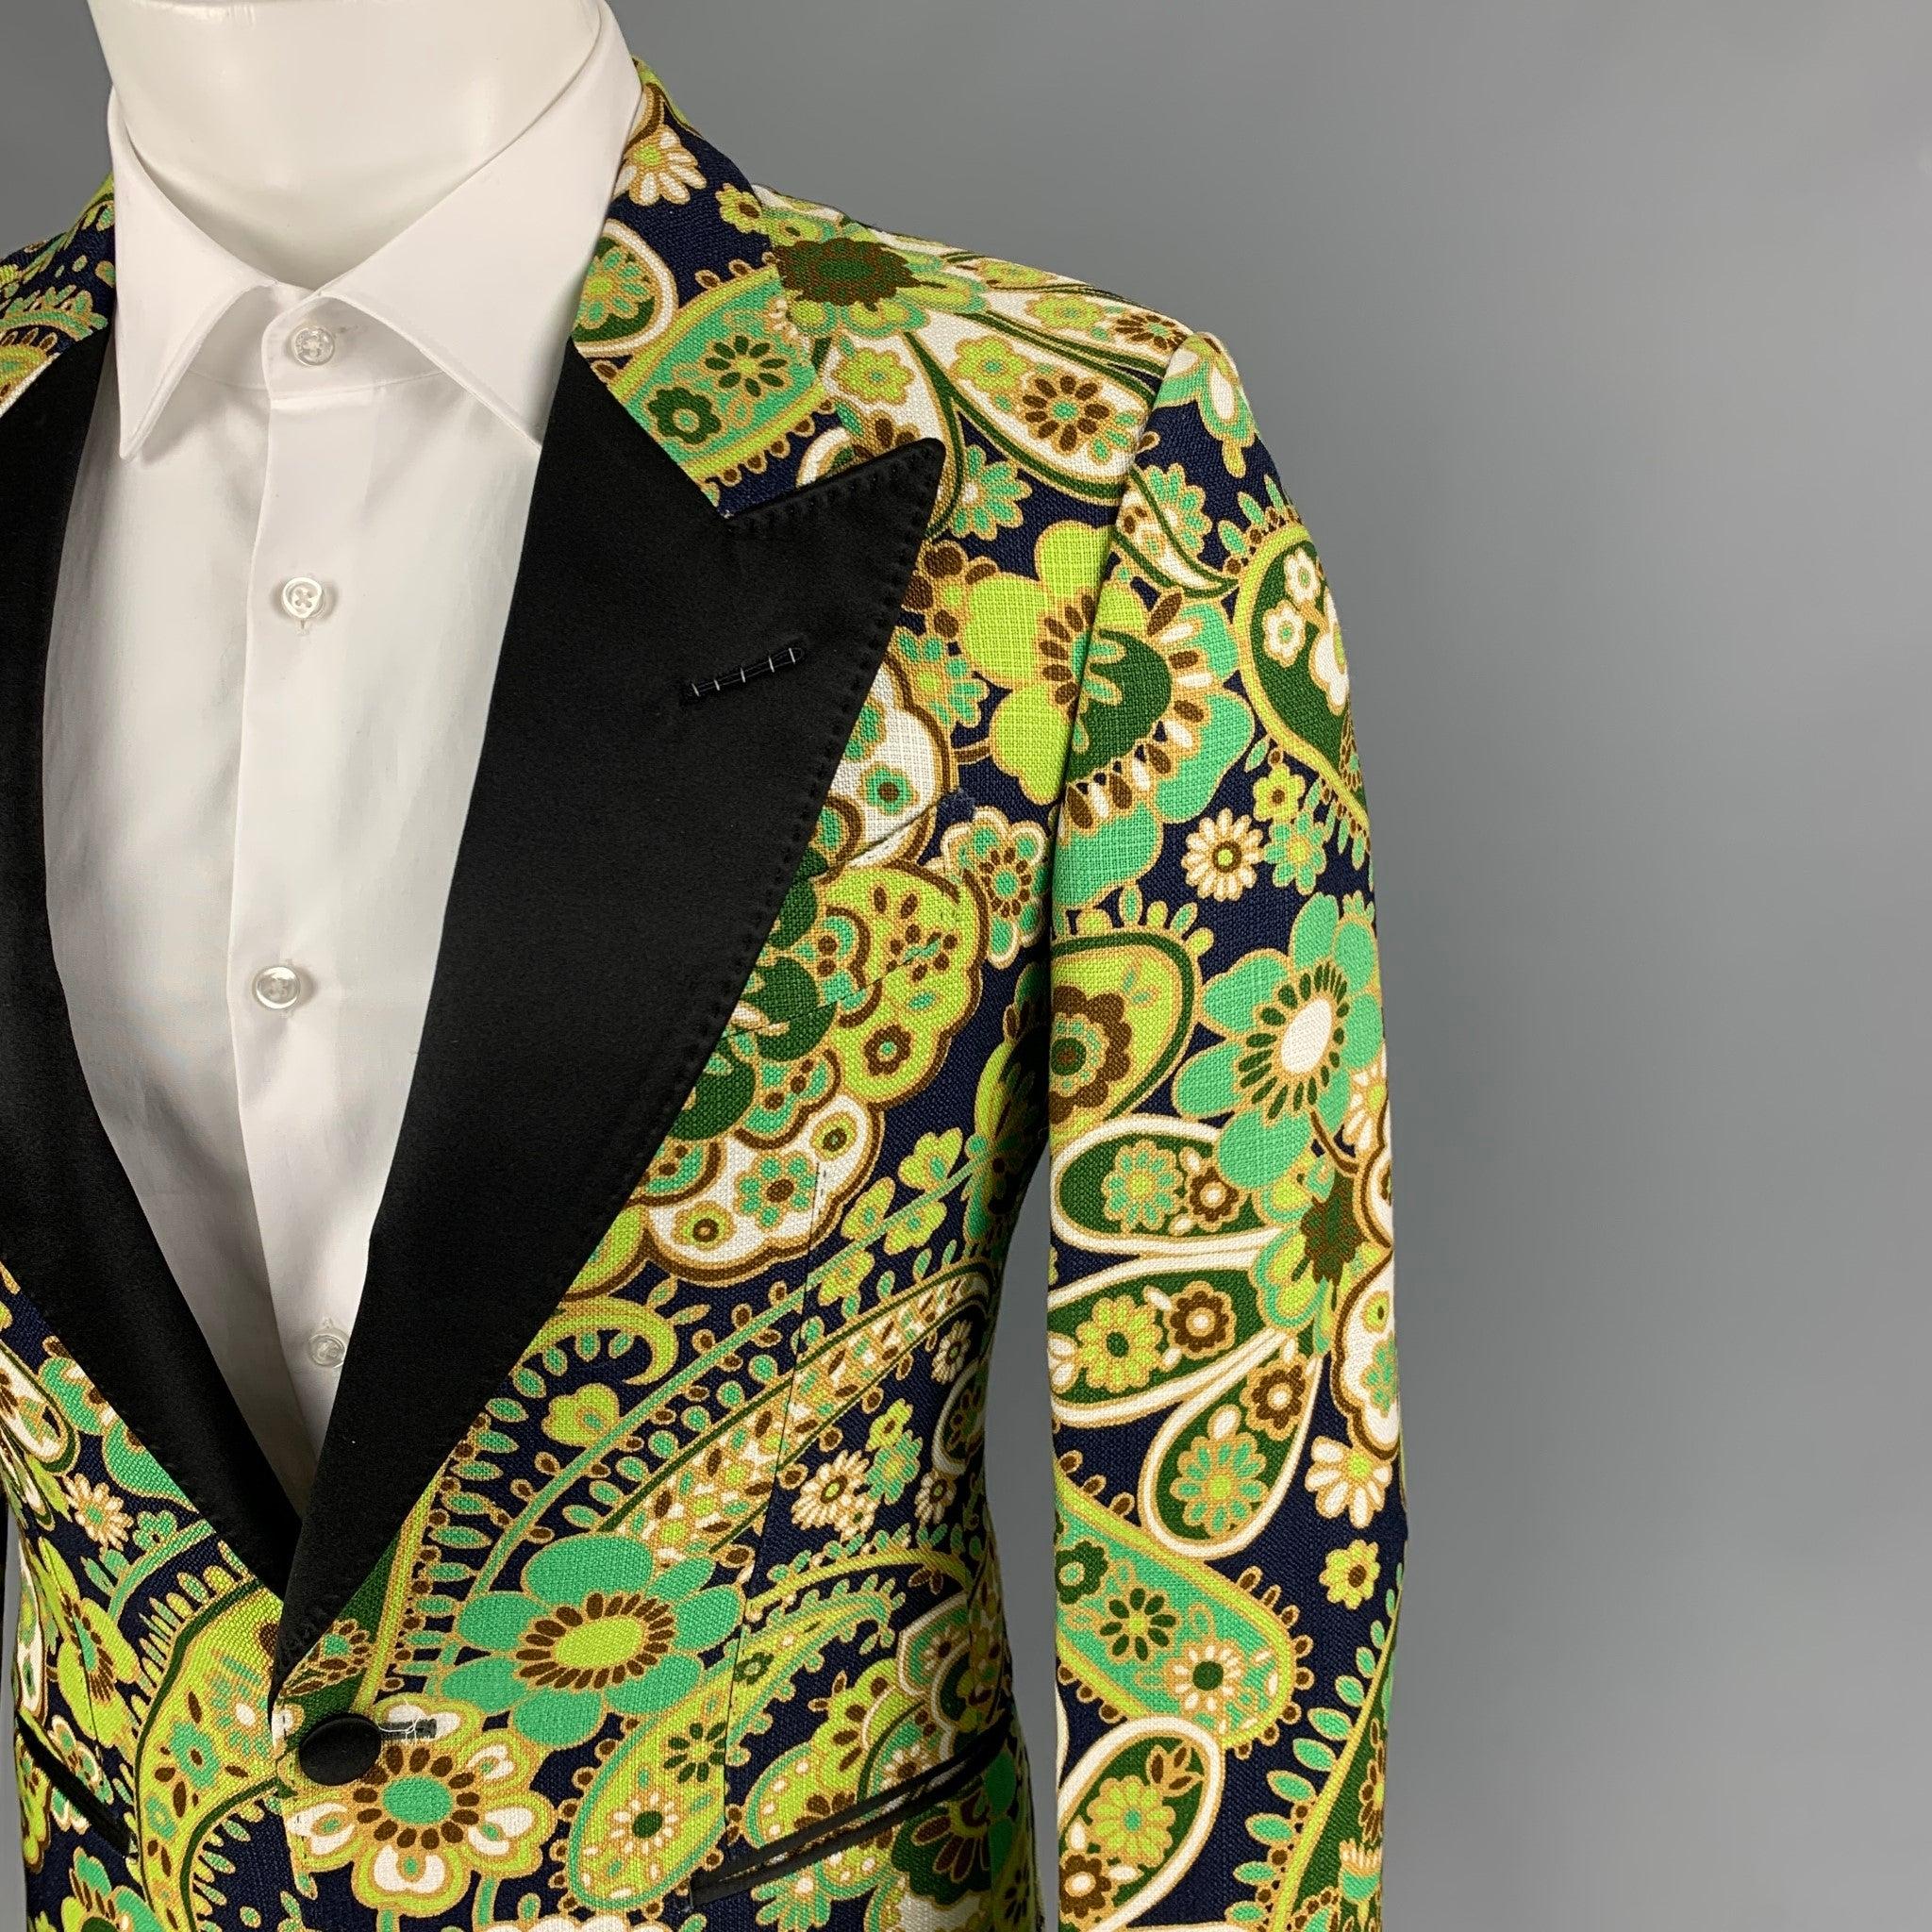 TOM FORD sport coat comes in a multi-color paisley print viscose with a full liner featuring a peak lapel, slit pockets, single back vent, and a single button closure.
New With Tags.
 

Marked:   44 R  

Measurements: 
 
Shoulder: 17 inches  Chest: